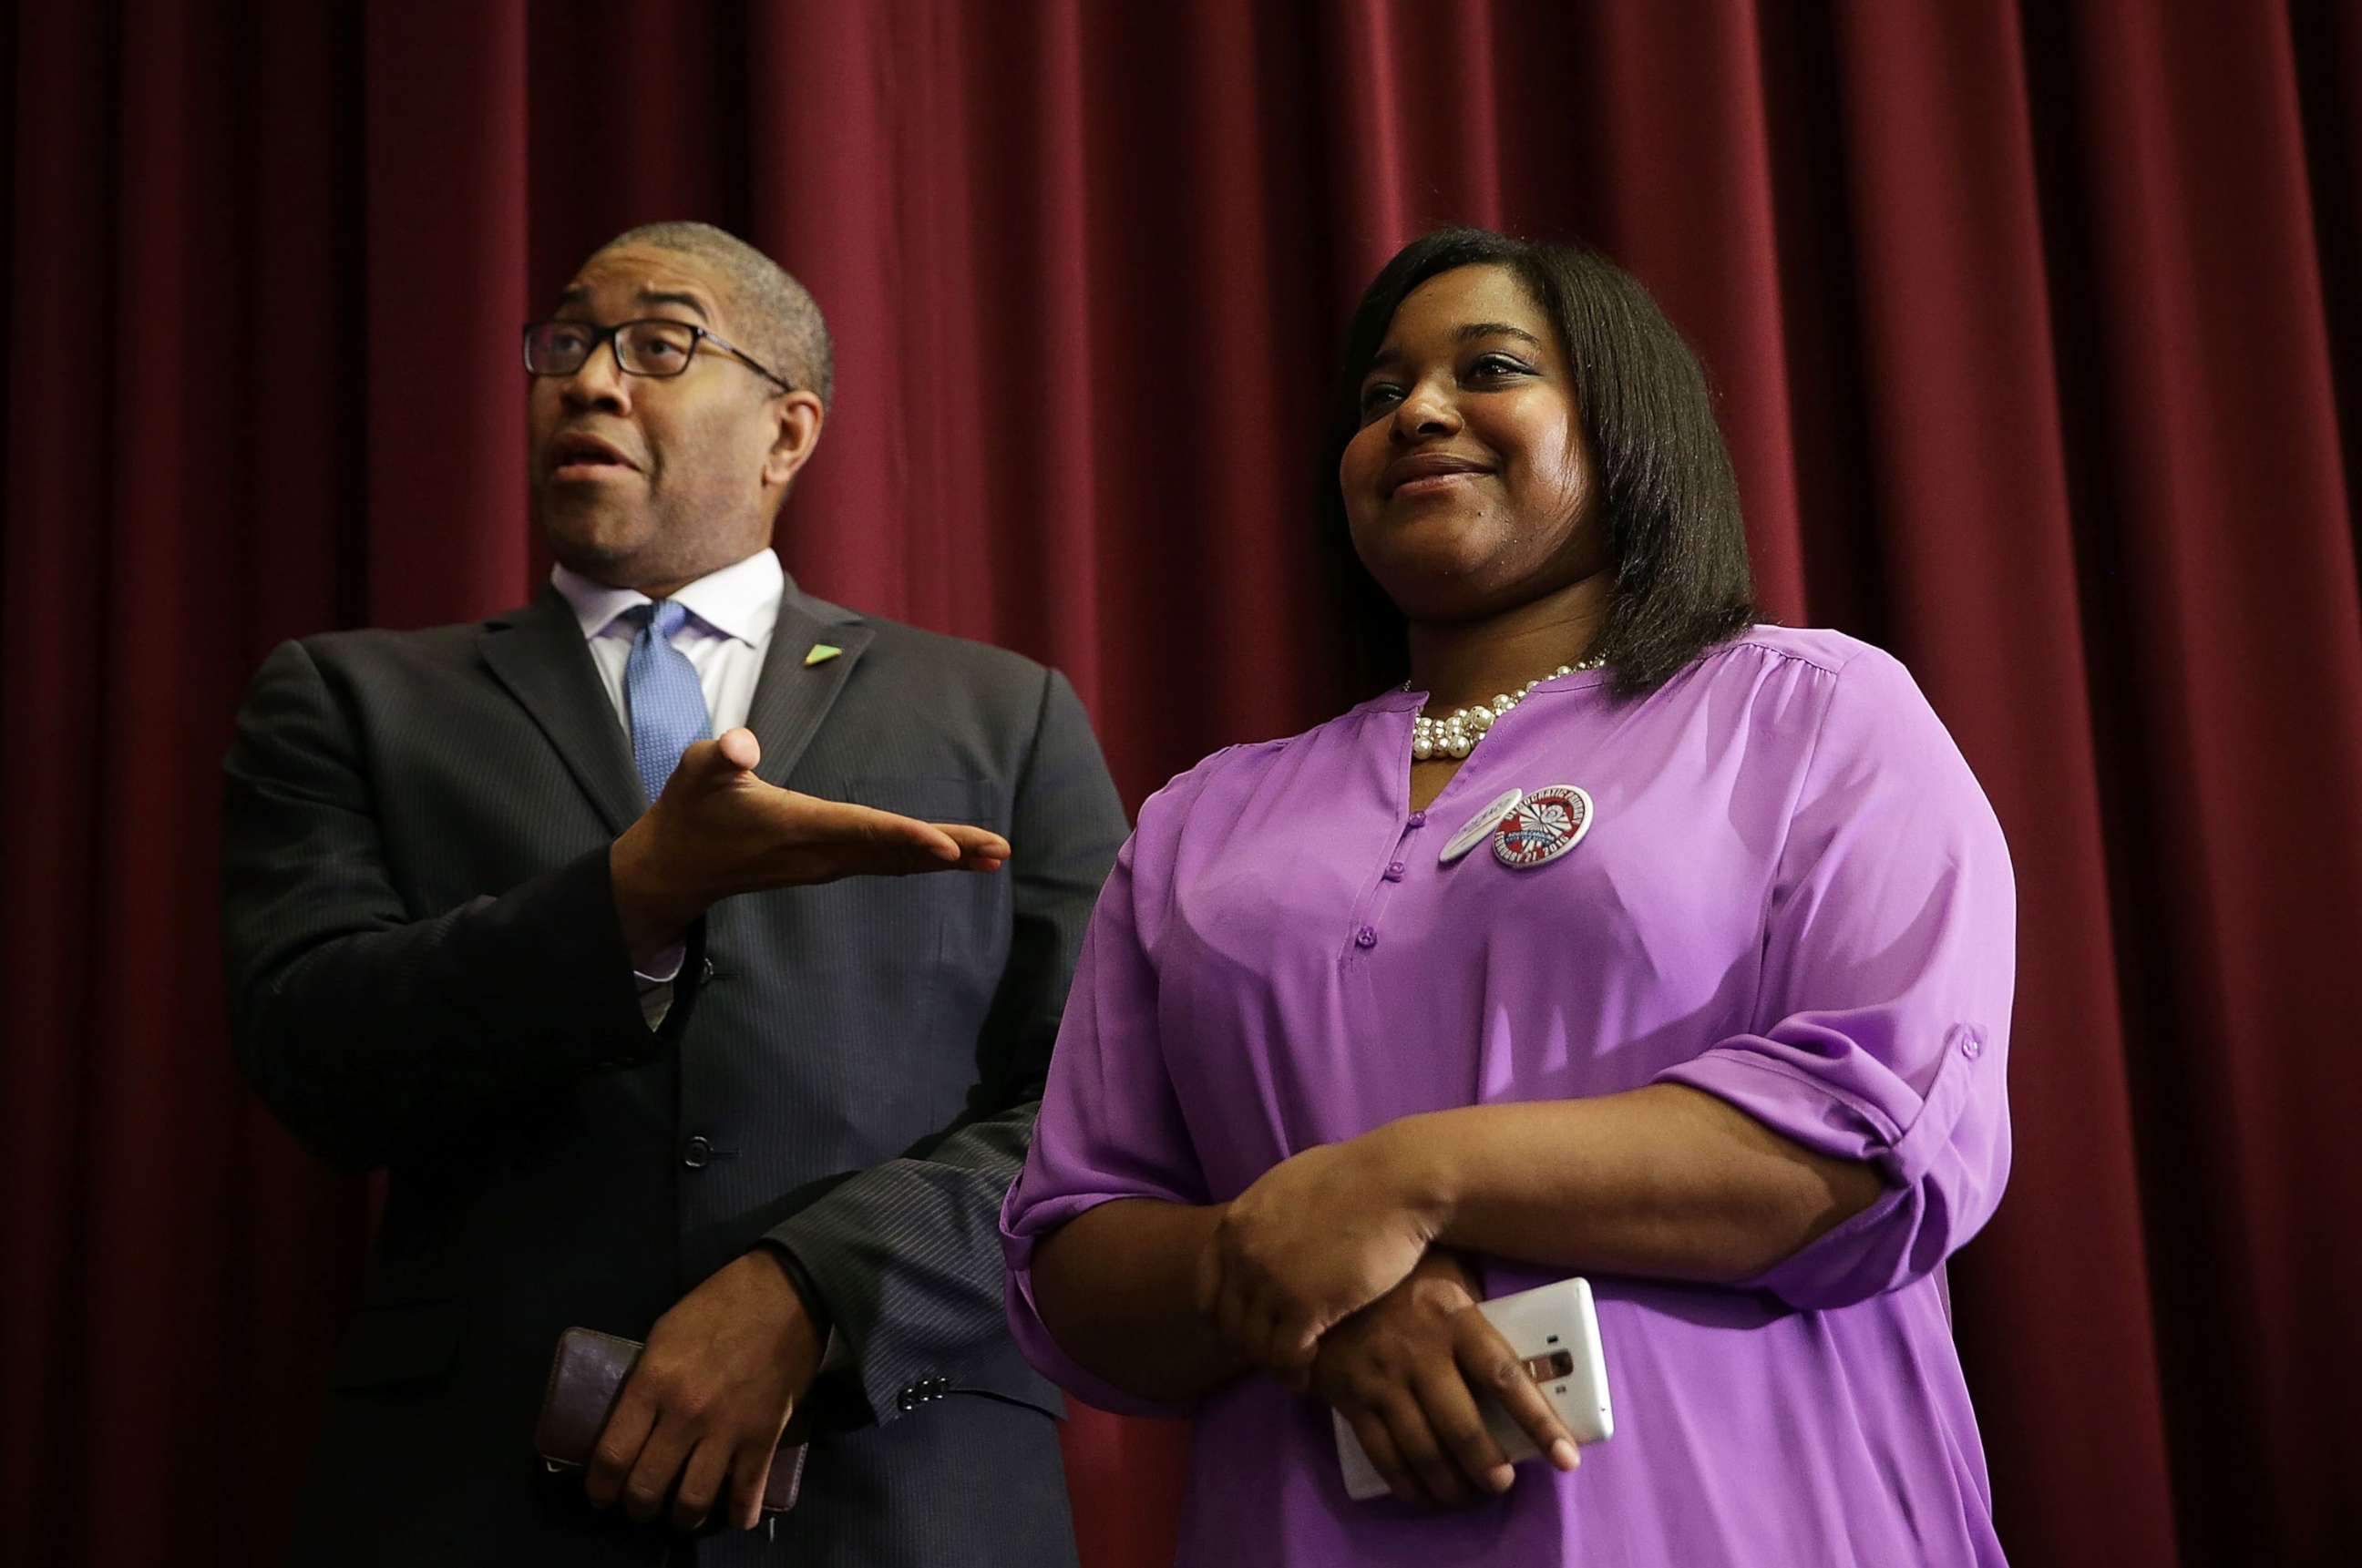 PHOTO: Erica Garner, (R), campaigns for Democratic presidential candidate Sen. Bernie Sanders during a campaign event at University of South Carolina, Feb. 16, 2016 in Columbia, S.C. 